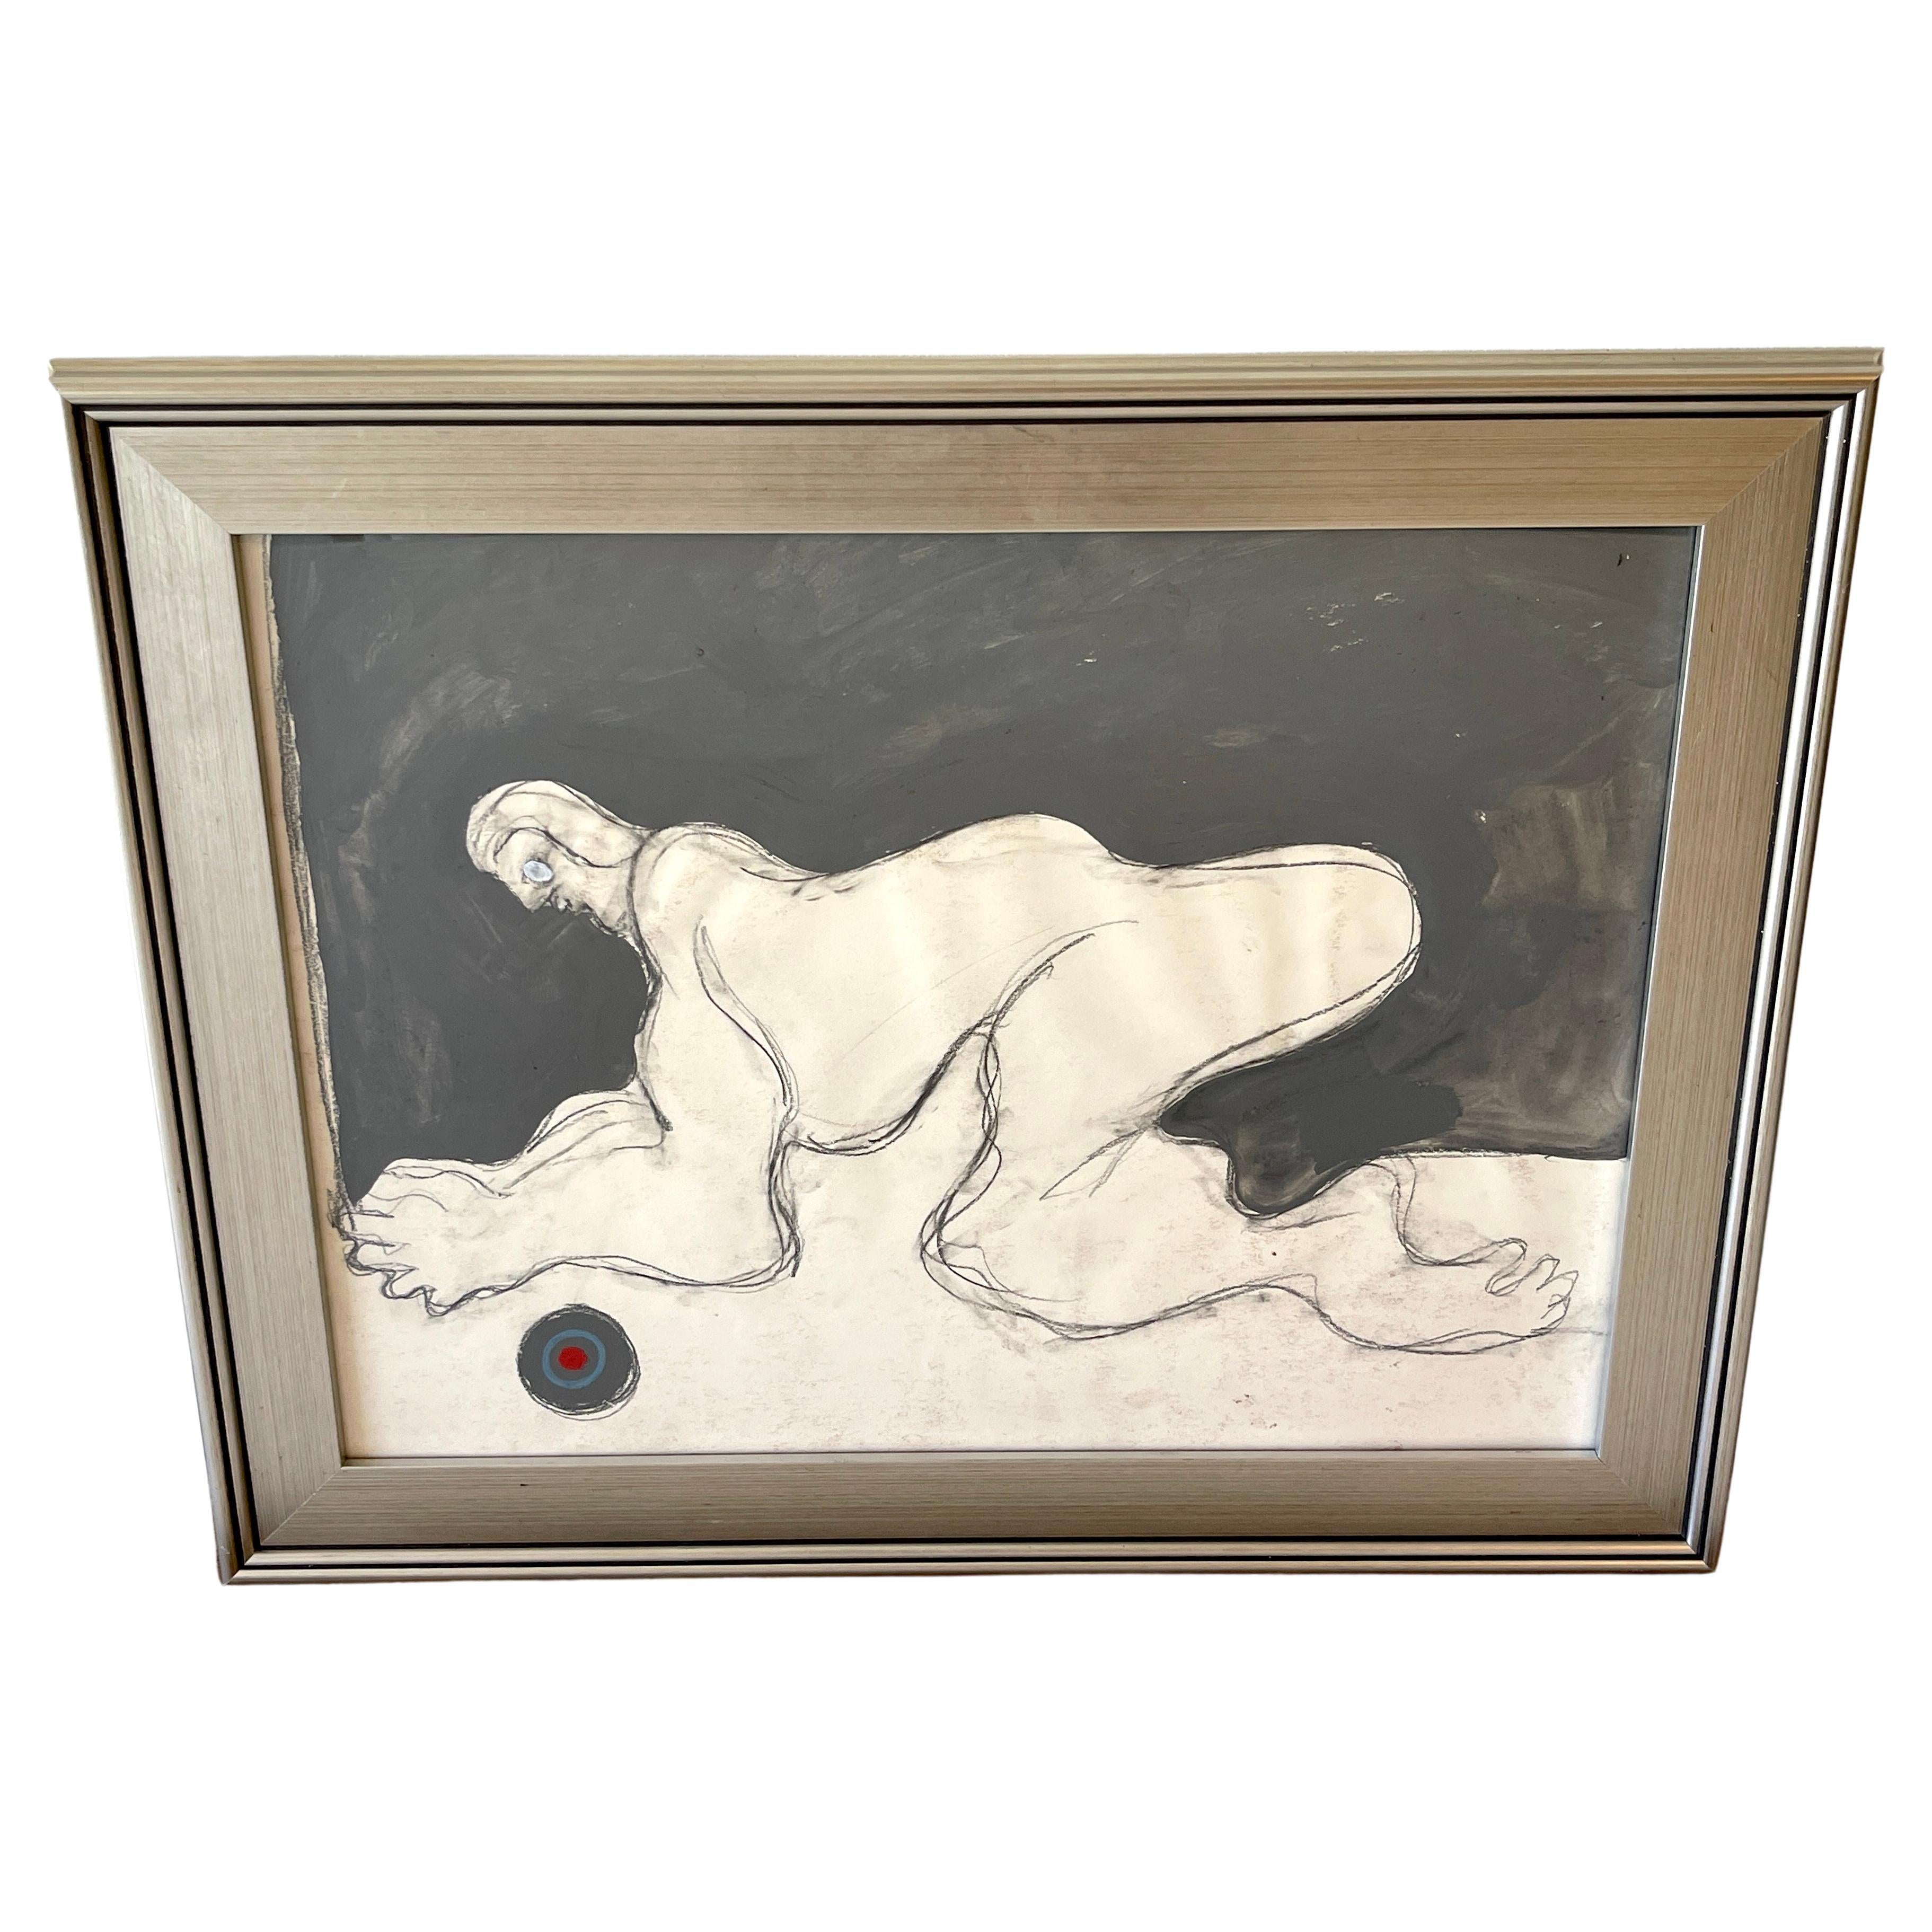 'Crouching Figure' Oil/Mixed Media on Paper, 1960s by Douglas D. Peden  For Sale